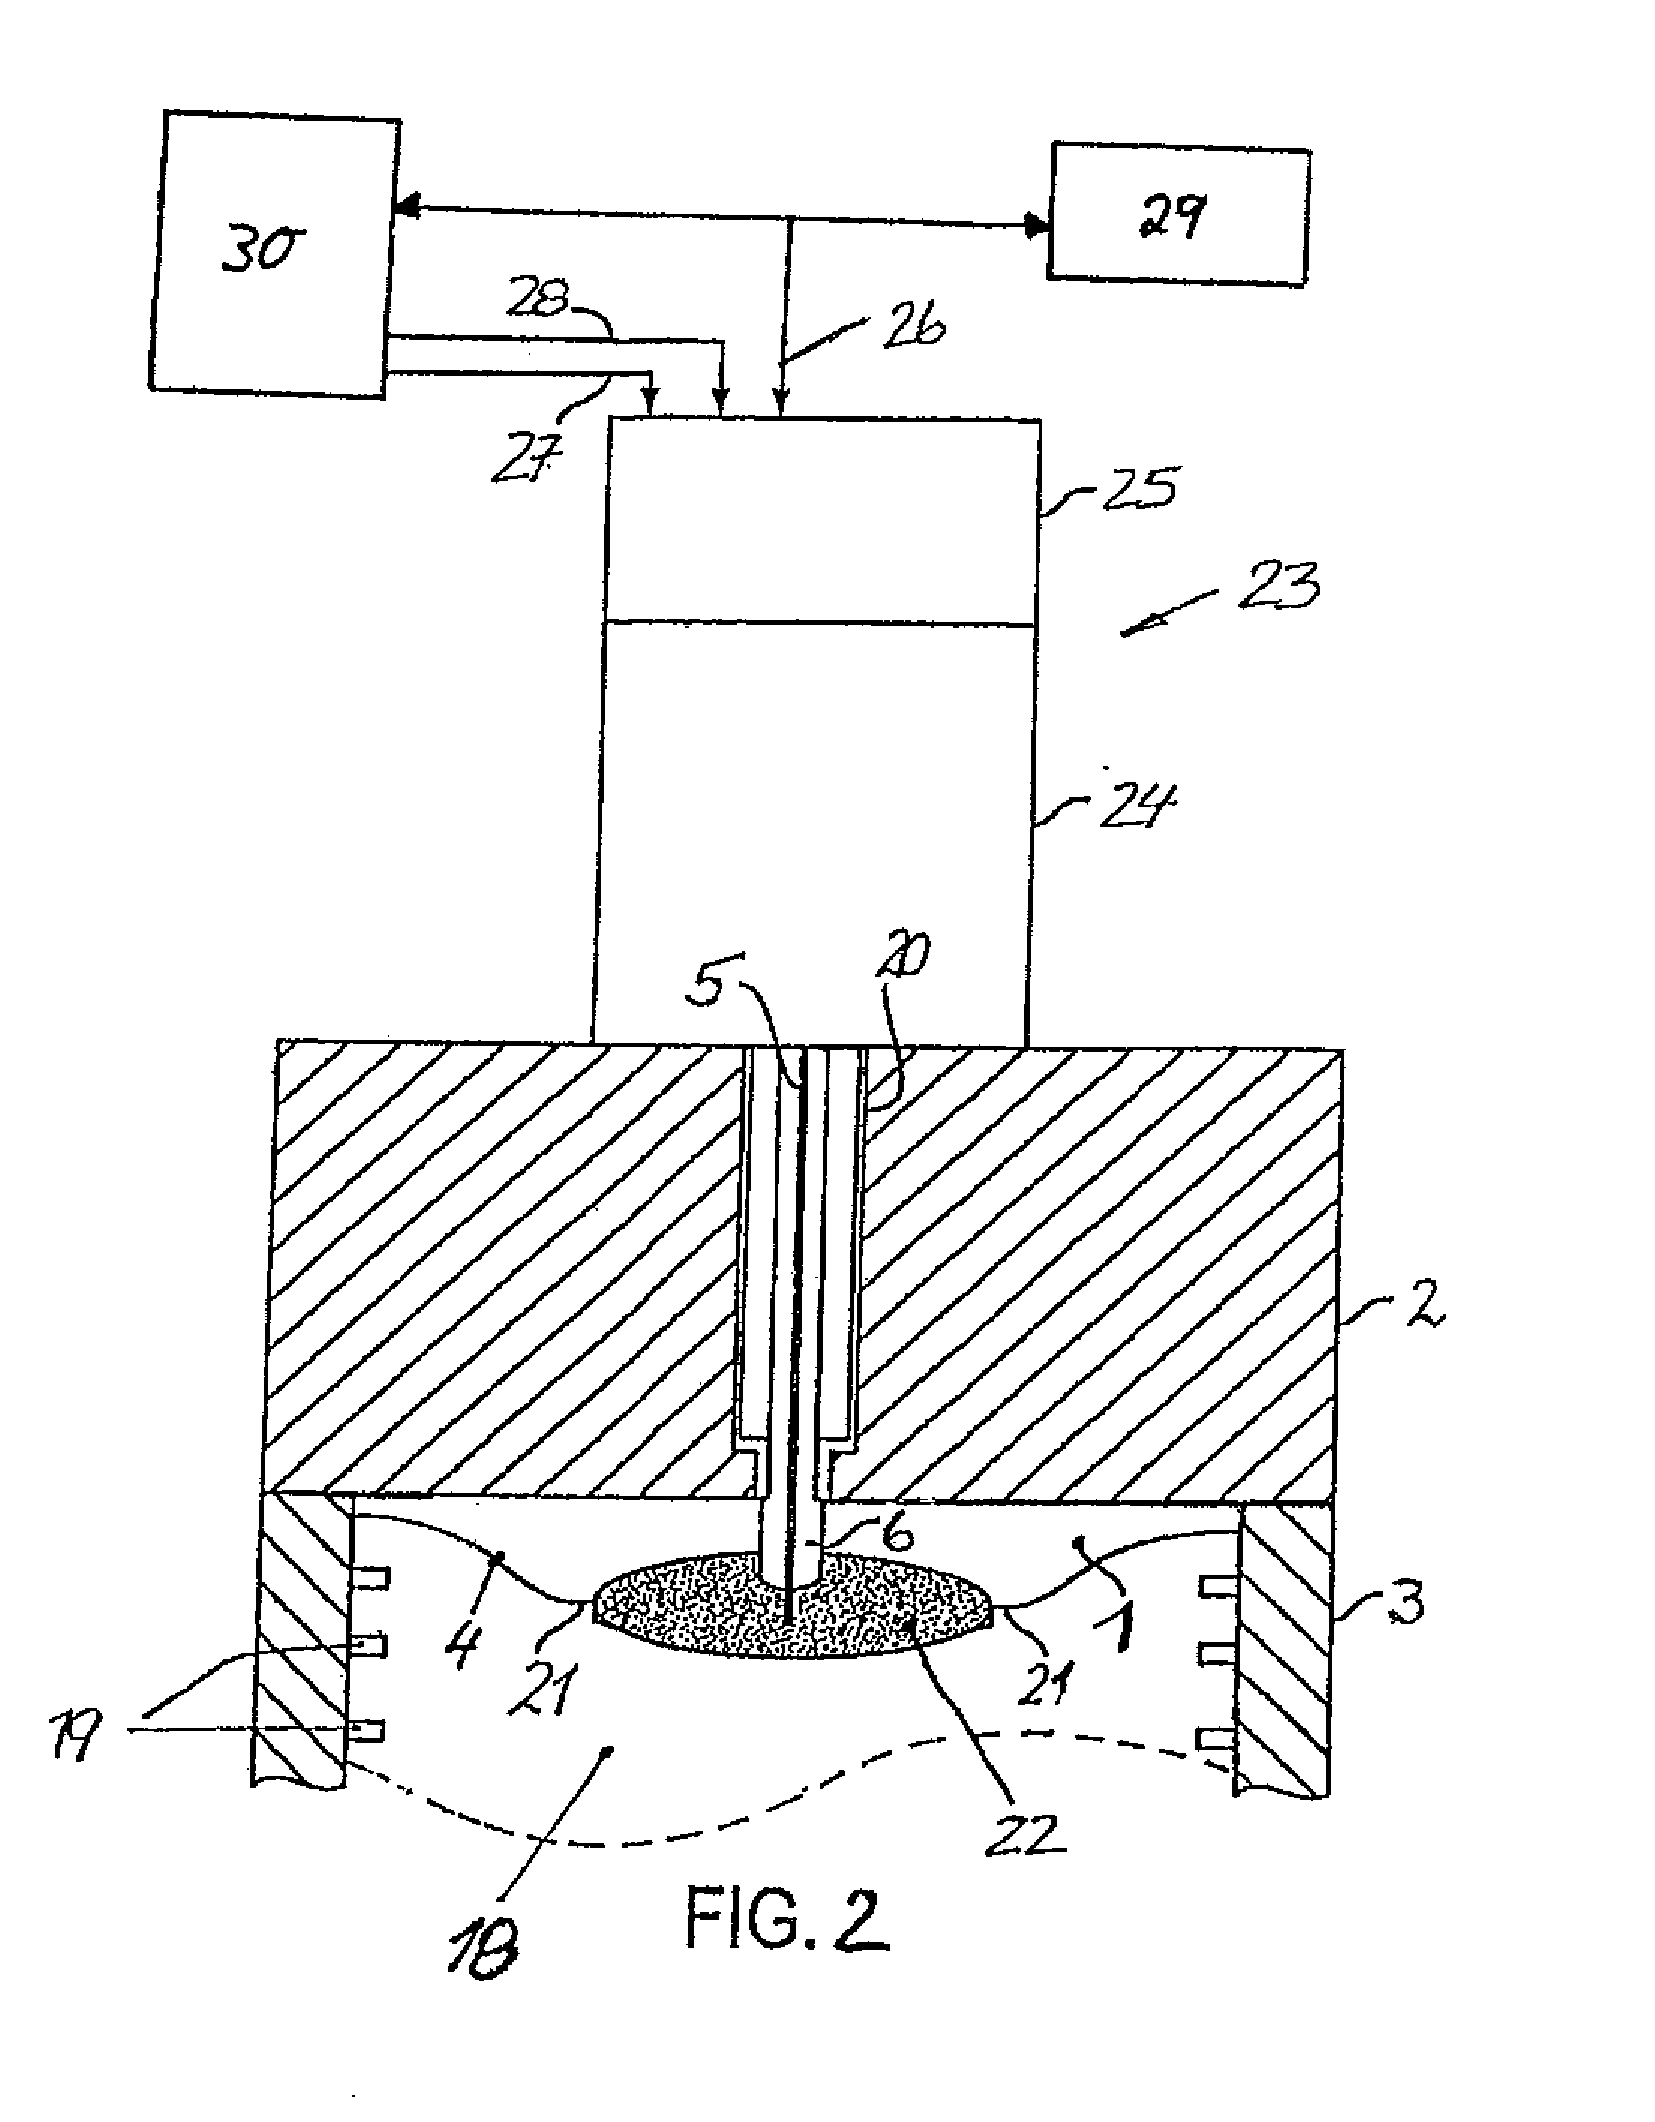 Method for Igniting a Fuel-Air Mixture of a Combustion Chamber, Particularly in an Internal Combustion Engine by Generating a Corona Discharge